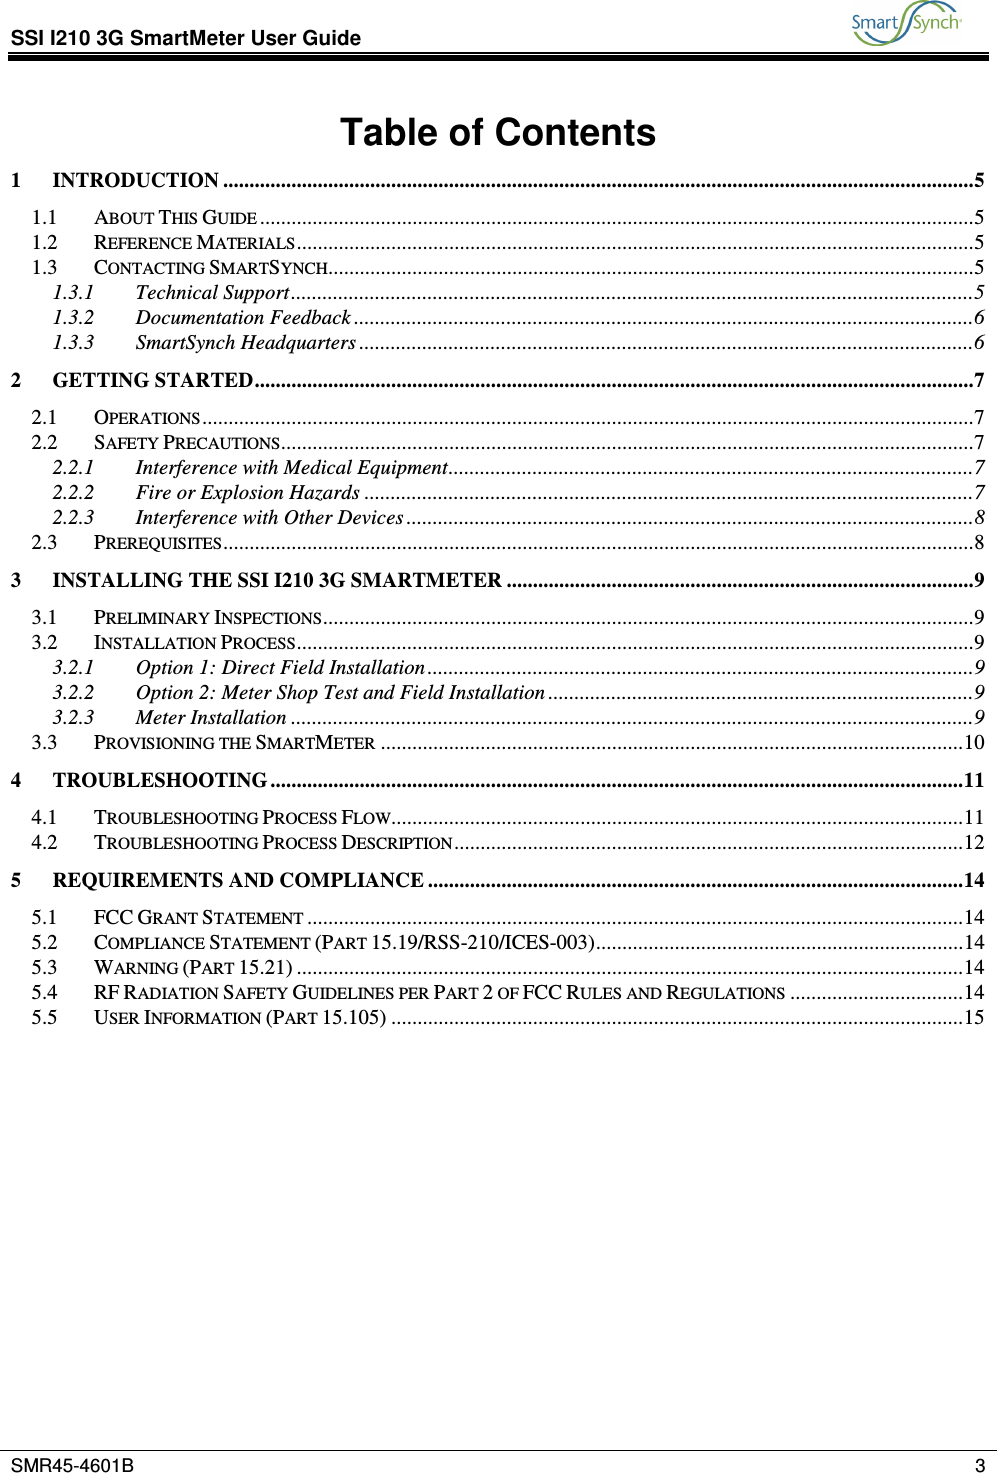 SSI I210 3G SmartMeter User Guide           SMR45-4601B    3  Table of Contents 1 INTRODUCTION ...............................................................................................................................................5 1.1 ABOUT THIS GUIDE ........................................................................................................................................5 1.2 REFERENCE MATERIALS.................................................................................................................................5 1.3 CONTACTING SMARTSYNCH...........................................................................................................................5 1.3.1 Technical Support..................................................................................................................................5 1.3.2 Documentation Feedback ......................................................................................................................6 1.3.3 SmartSynch Headquarters .....................................................................................................................6 2 GETTING STARTED.........................................................................................................................................7 2.1 OPERATIONS...................................................................................................................................................7 2.2 SAFETY PRECAUTIONS....................................................................................................................................7 2.2.1 Interference with Medical Equipment....................................................................................................7 2.2.2 Fire or Explosion Hazards ....................................................................................................................7 2.2.3 Interference with Other Devices ............................................................................................................8 2.3 PREREQUISITES...............................................................................................................................................8 3 INSTALLING THE SSI I210 3G SMARTMETER .........................................................................................9 3.1 PRELIMINARY INSPECTIONS............................................................................................................................9 3.2 INSTALLATION PROCESS.................................................................................................................................9 3.2.1 Option 1: Direct Field Installation ........................................................................................................9 3.2.2 Option 2: Meter Shop Test and Field Installation .................................................................................9 3.2.3 Meter Installation ..................................................................................................................................9 3.3 PROVISIONING THE SMARTMETER ...............................................................................................................10 4 TROUBLESHOOTING ....................................................................................................................................11 4.1 TROUBLESHOOTING PROCESS FLOW.............................................................................................................11 4.2 TROUBLESHOOTING PROCESS DESCRIPTION.................................................................................................12 5 REQUIREMENTS AND COMPLIANCE ......................................................................................................14 5.1 FCC GRANT STATEMENT .............................................................................................................................14 5.2 COMPLIANCE STATEMENT (PART 15.19/RSS-210/ICES-003)......................................................................14 5.3 WARNING (PART 15.21) ...............................................................................................................................14 5.4 RF RADIATION SAFETY GUIDELINES PER PART 2 OF FCC RULES AND REGULATIONS .................................14 5.5 USER INFORMATION (PART 15.105) .............................................................................................................15  